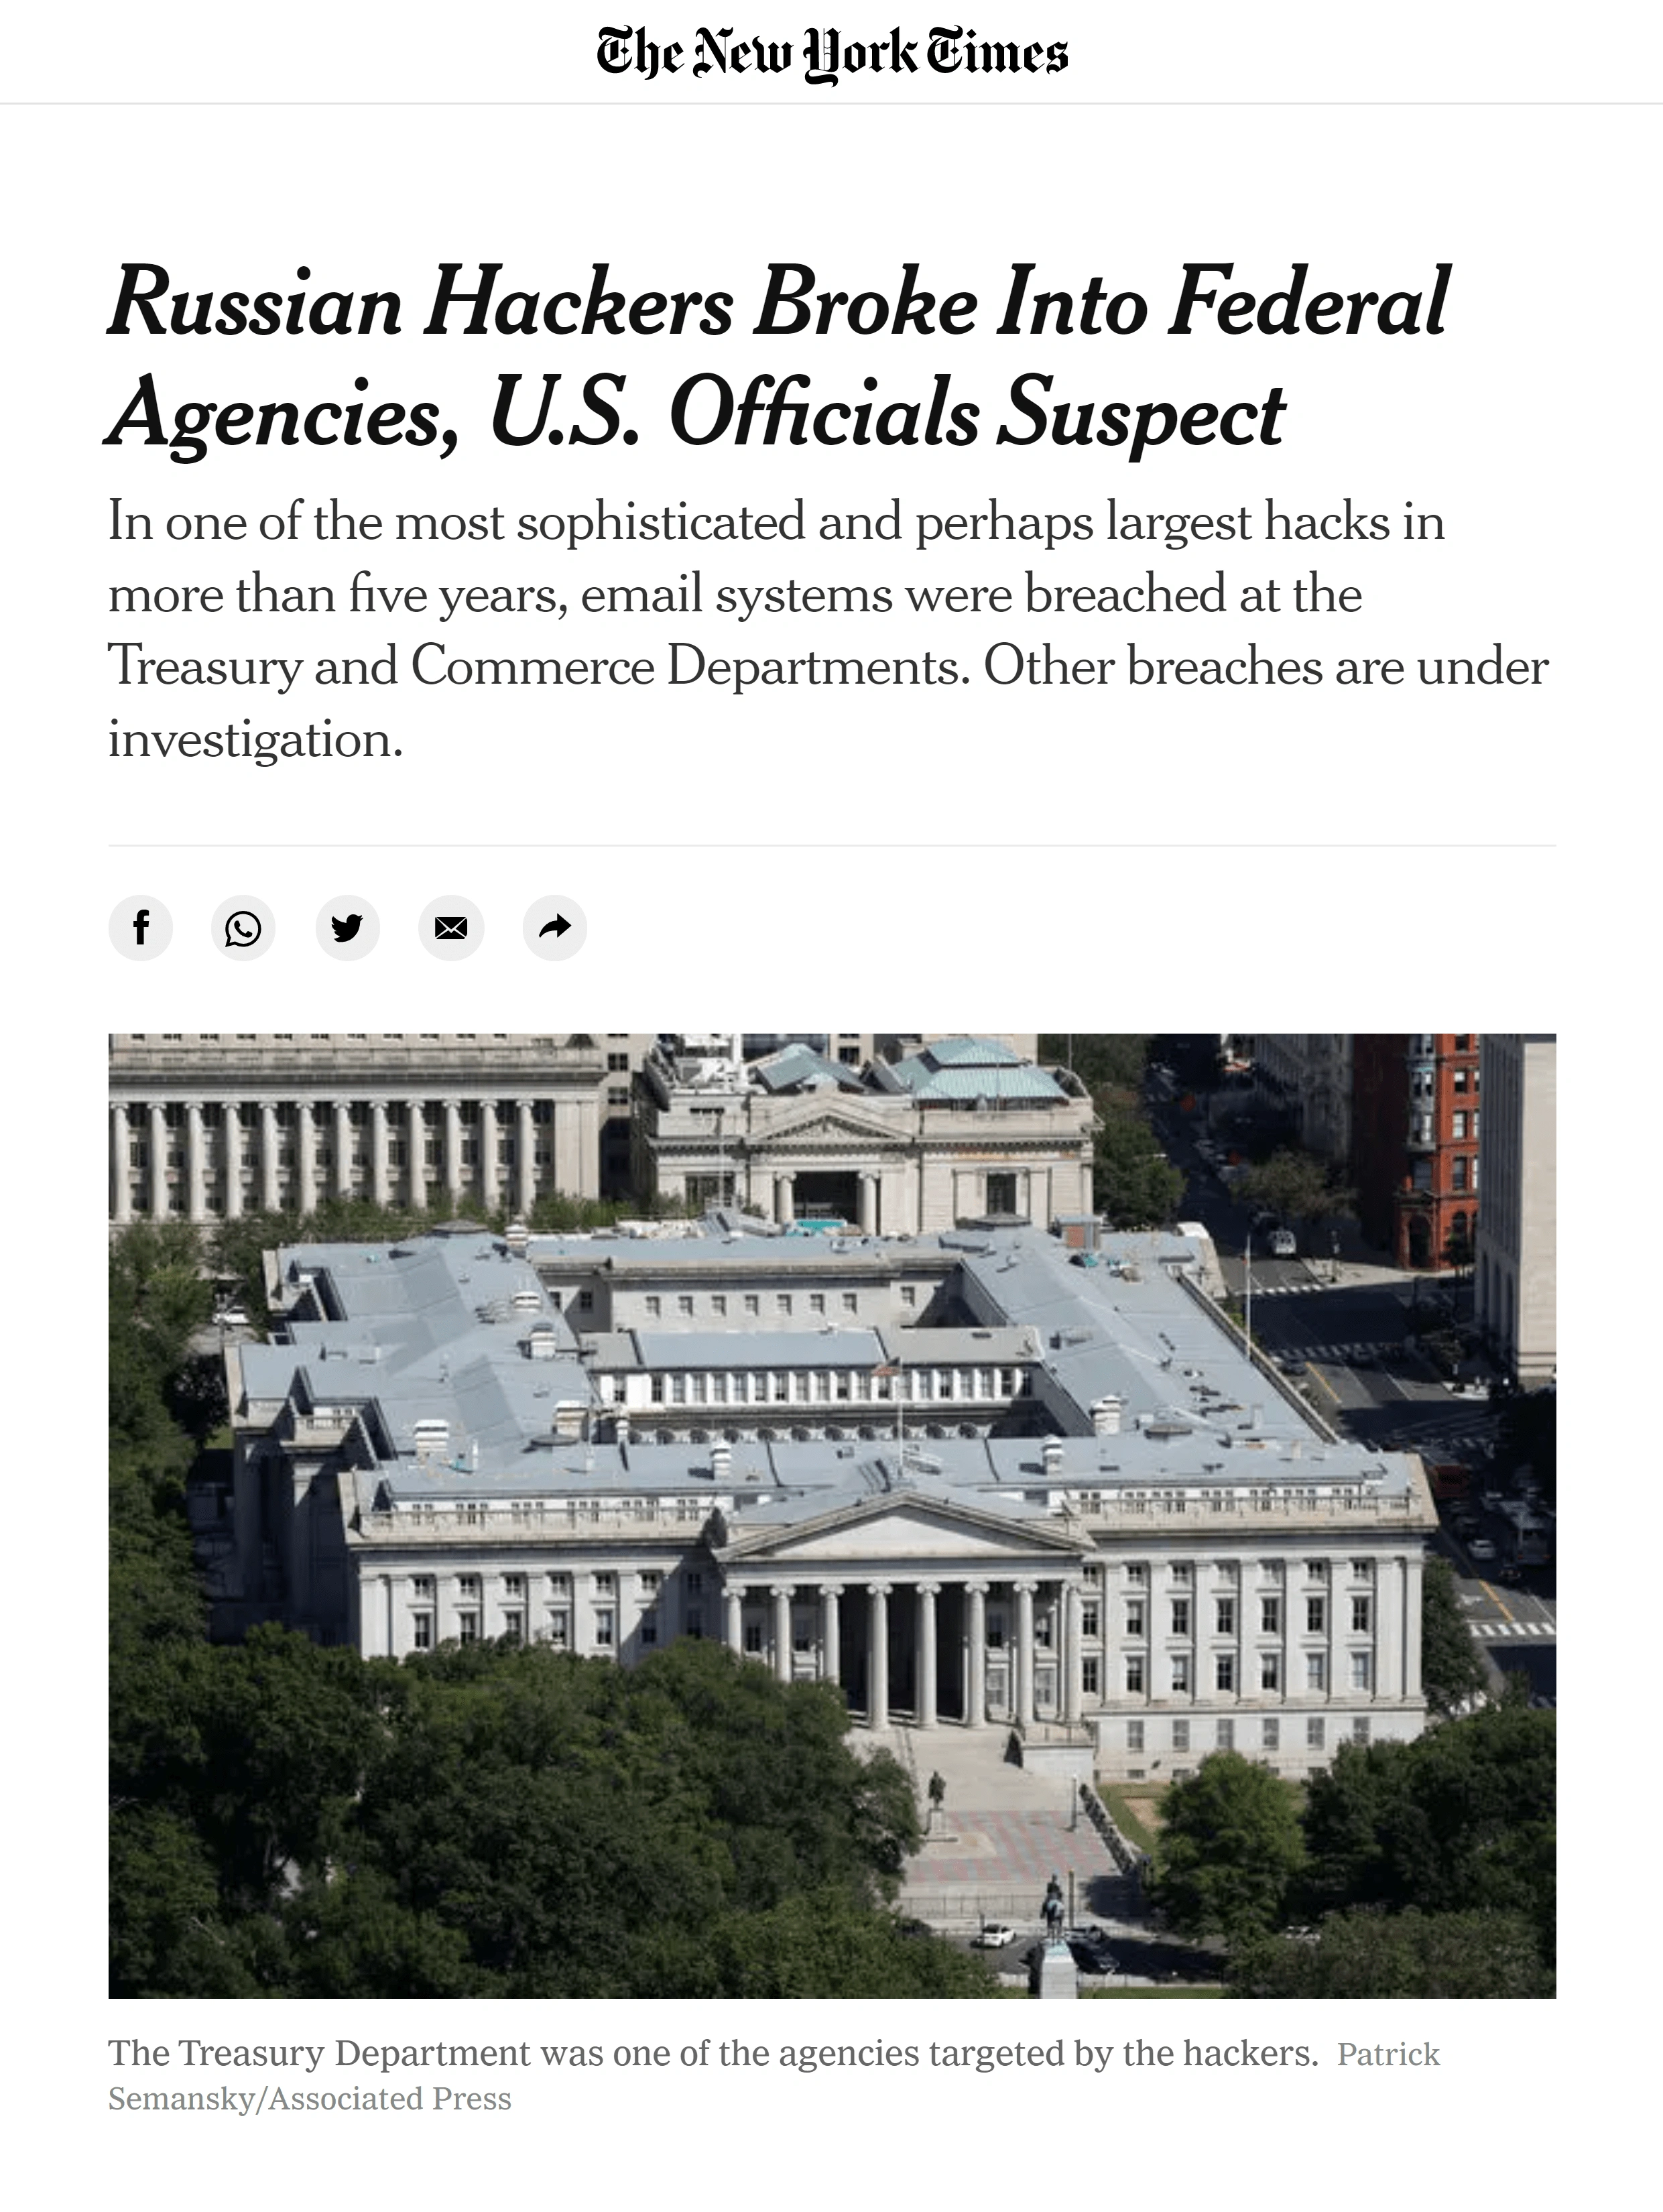 nytimes-article-min.png